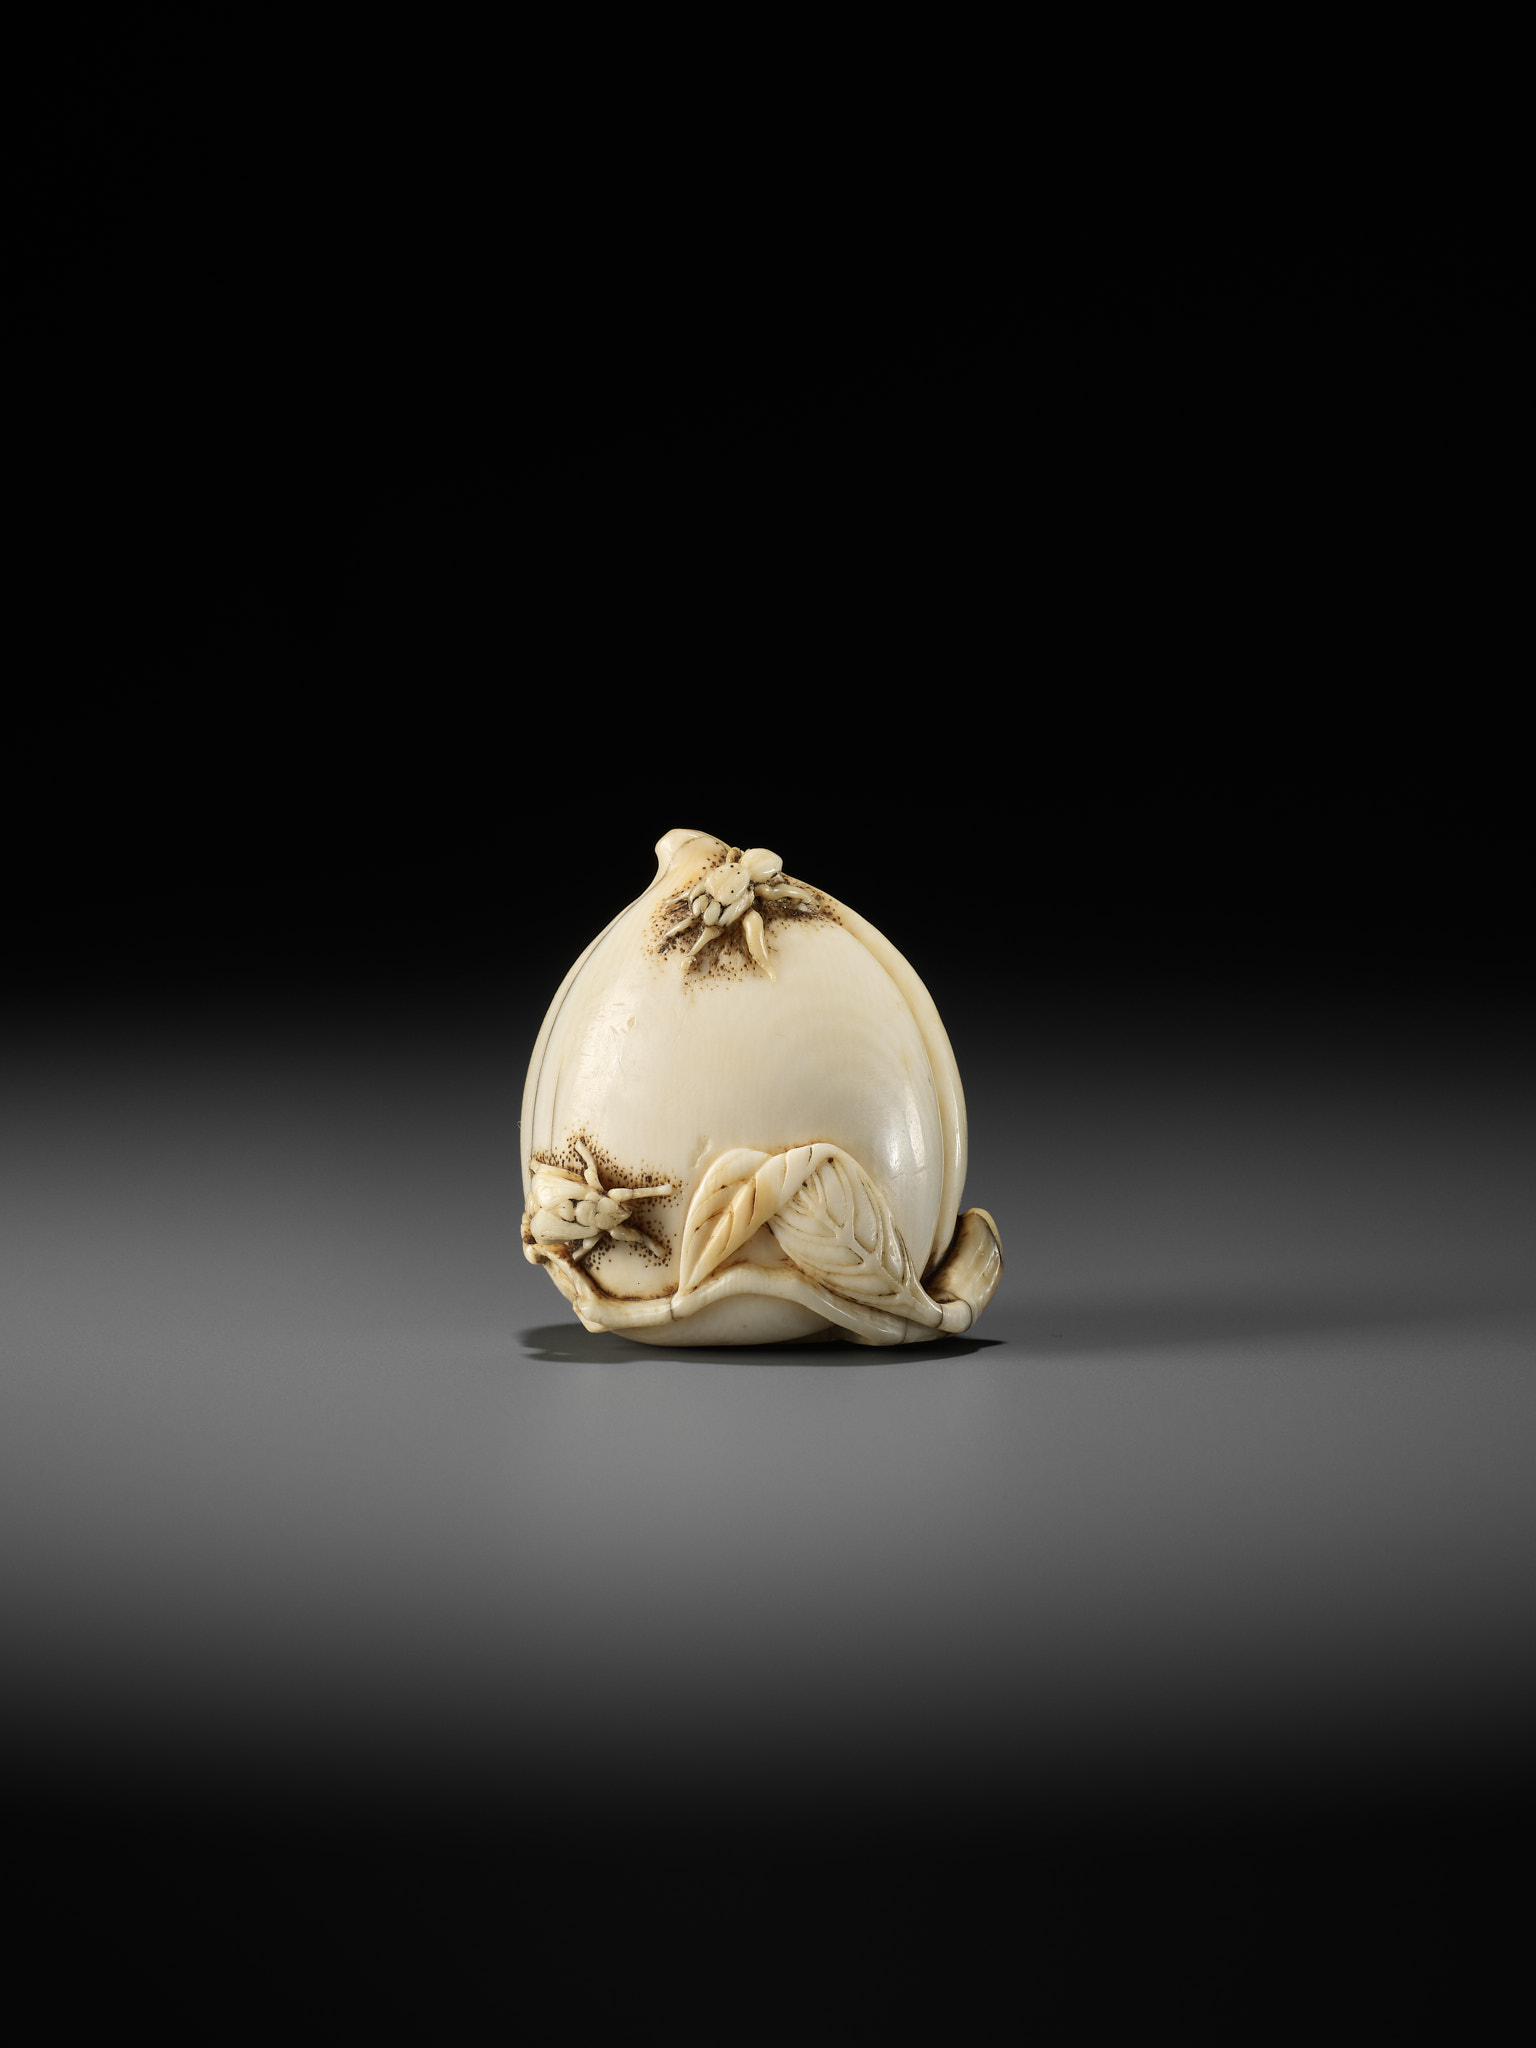 AN IVORY NETSUKE OF A PEACH WITH INSECTS - Image 2 of 10